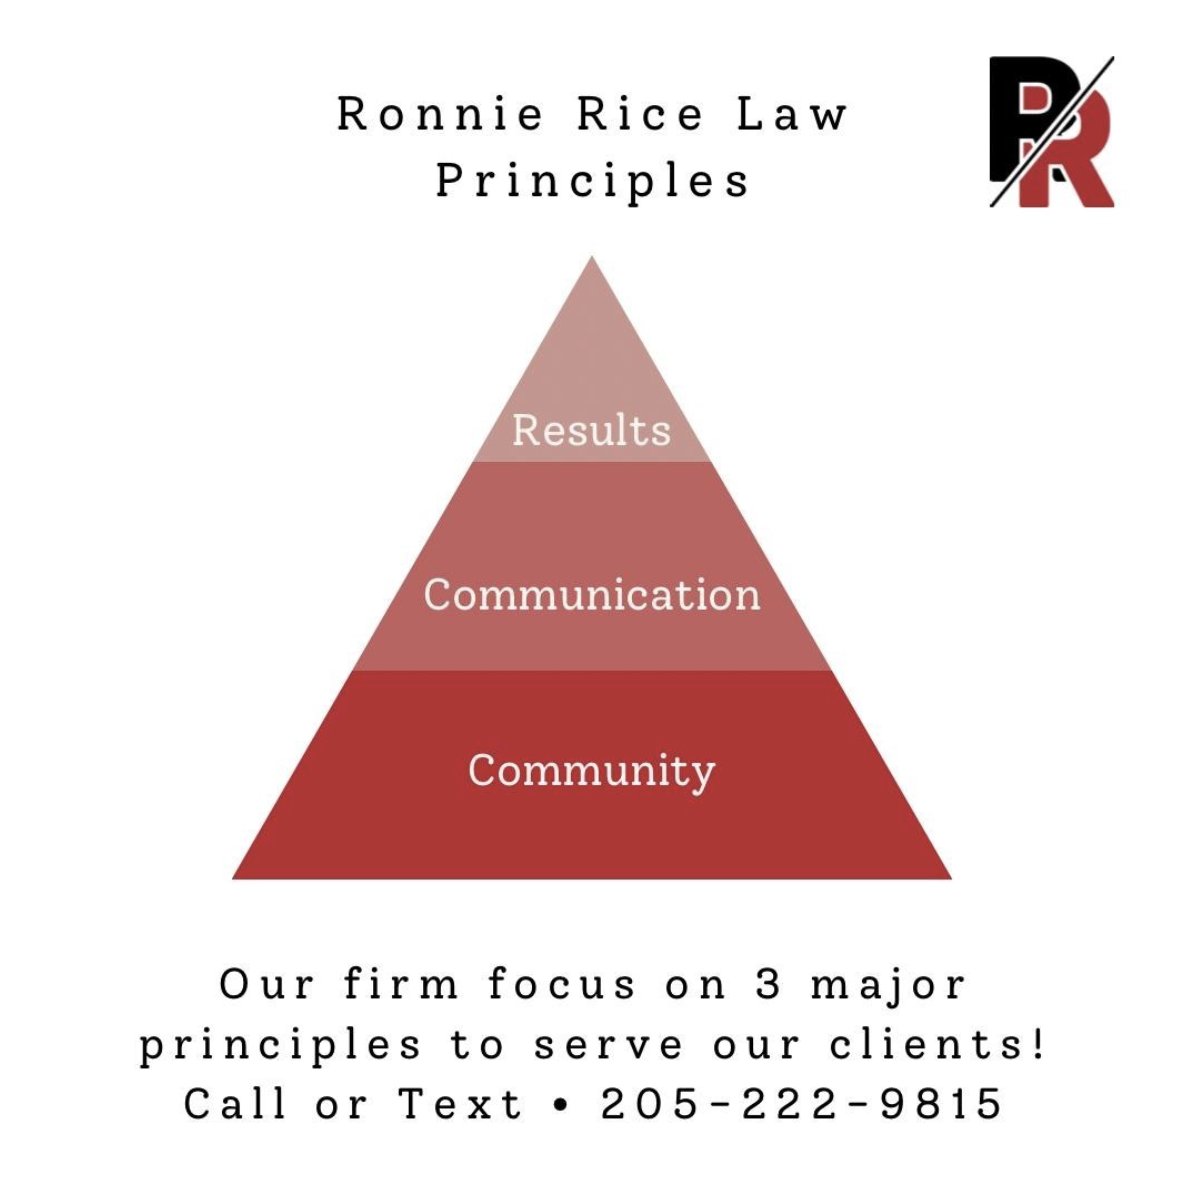 Results, Communication & Community. Principles we stand by. 
.
.
Contact the Law Office of Attorney Ronnie Rice 205-222-9815.
.
.
#lawfirm #attorney #accident #lawyers #personalinjury #love #business #derecho #injury #abogadas #lawyering #universidad #abogados #legal #caraccident https://t.co/irrITMO0Wz